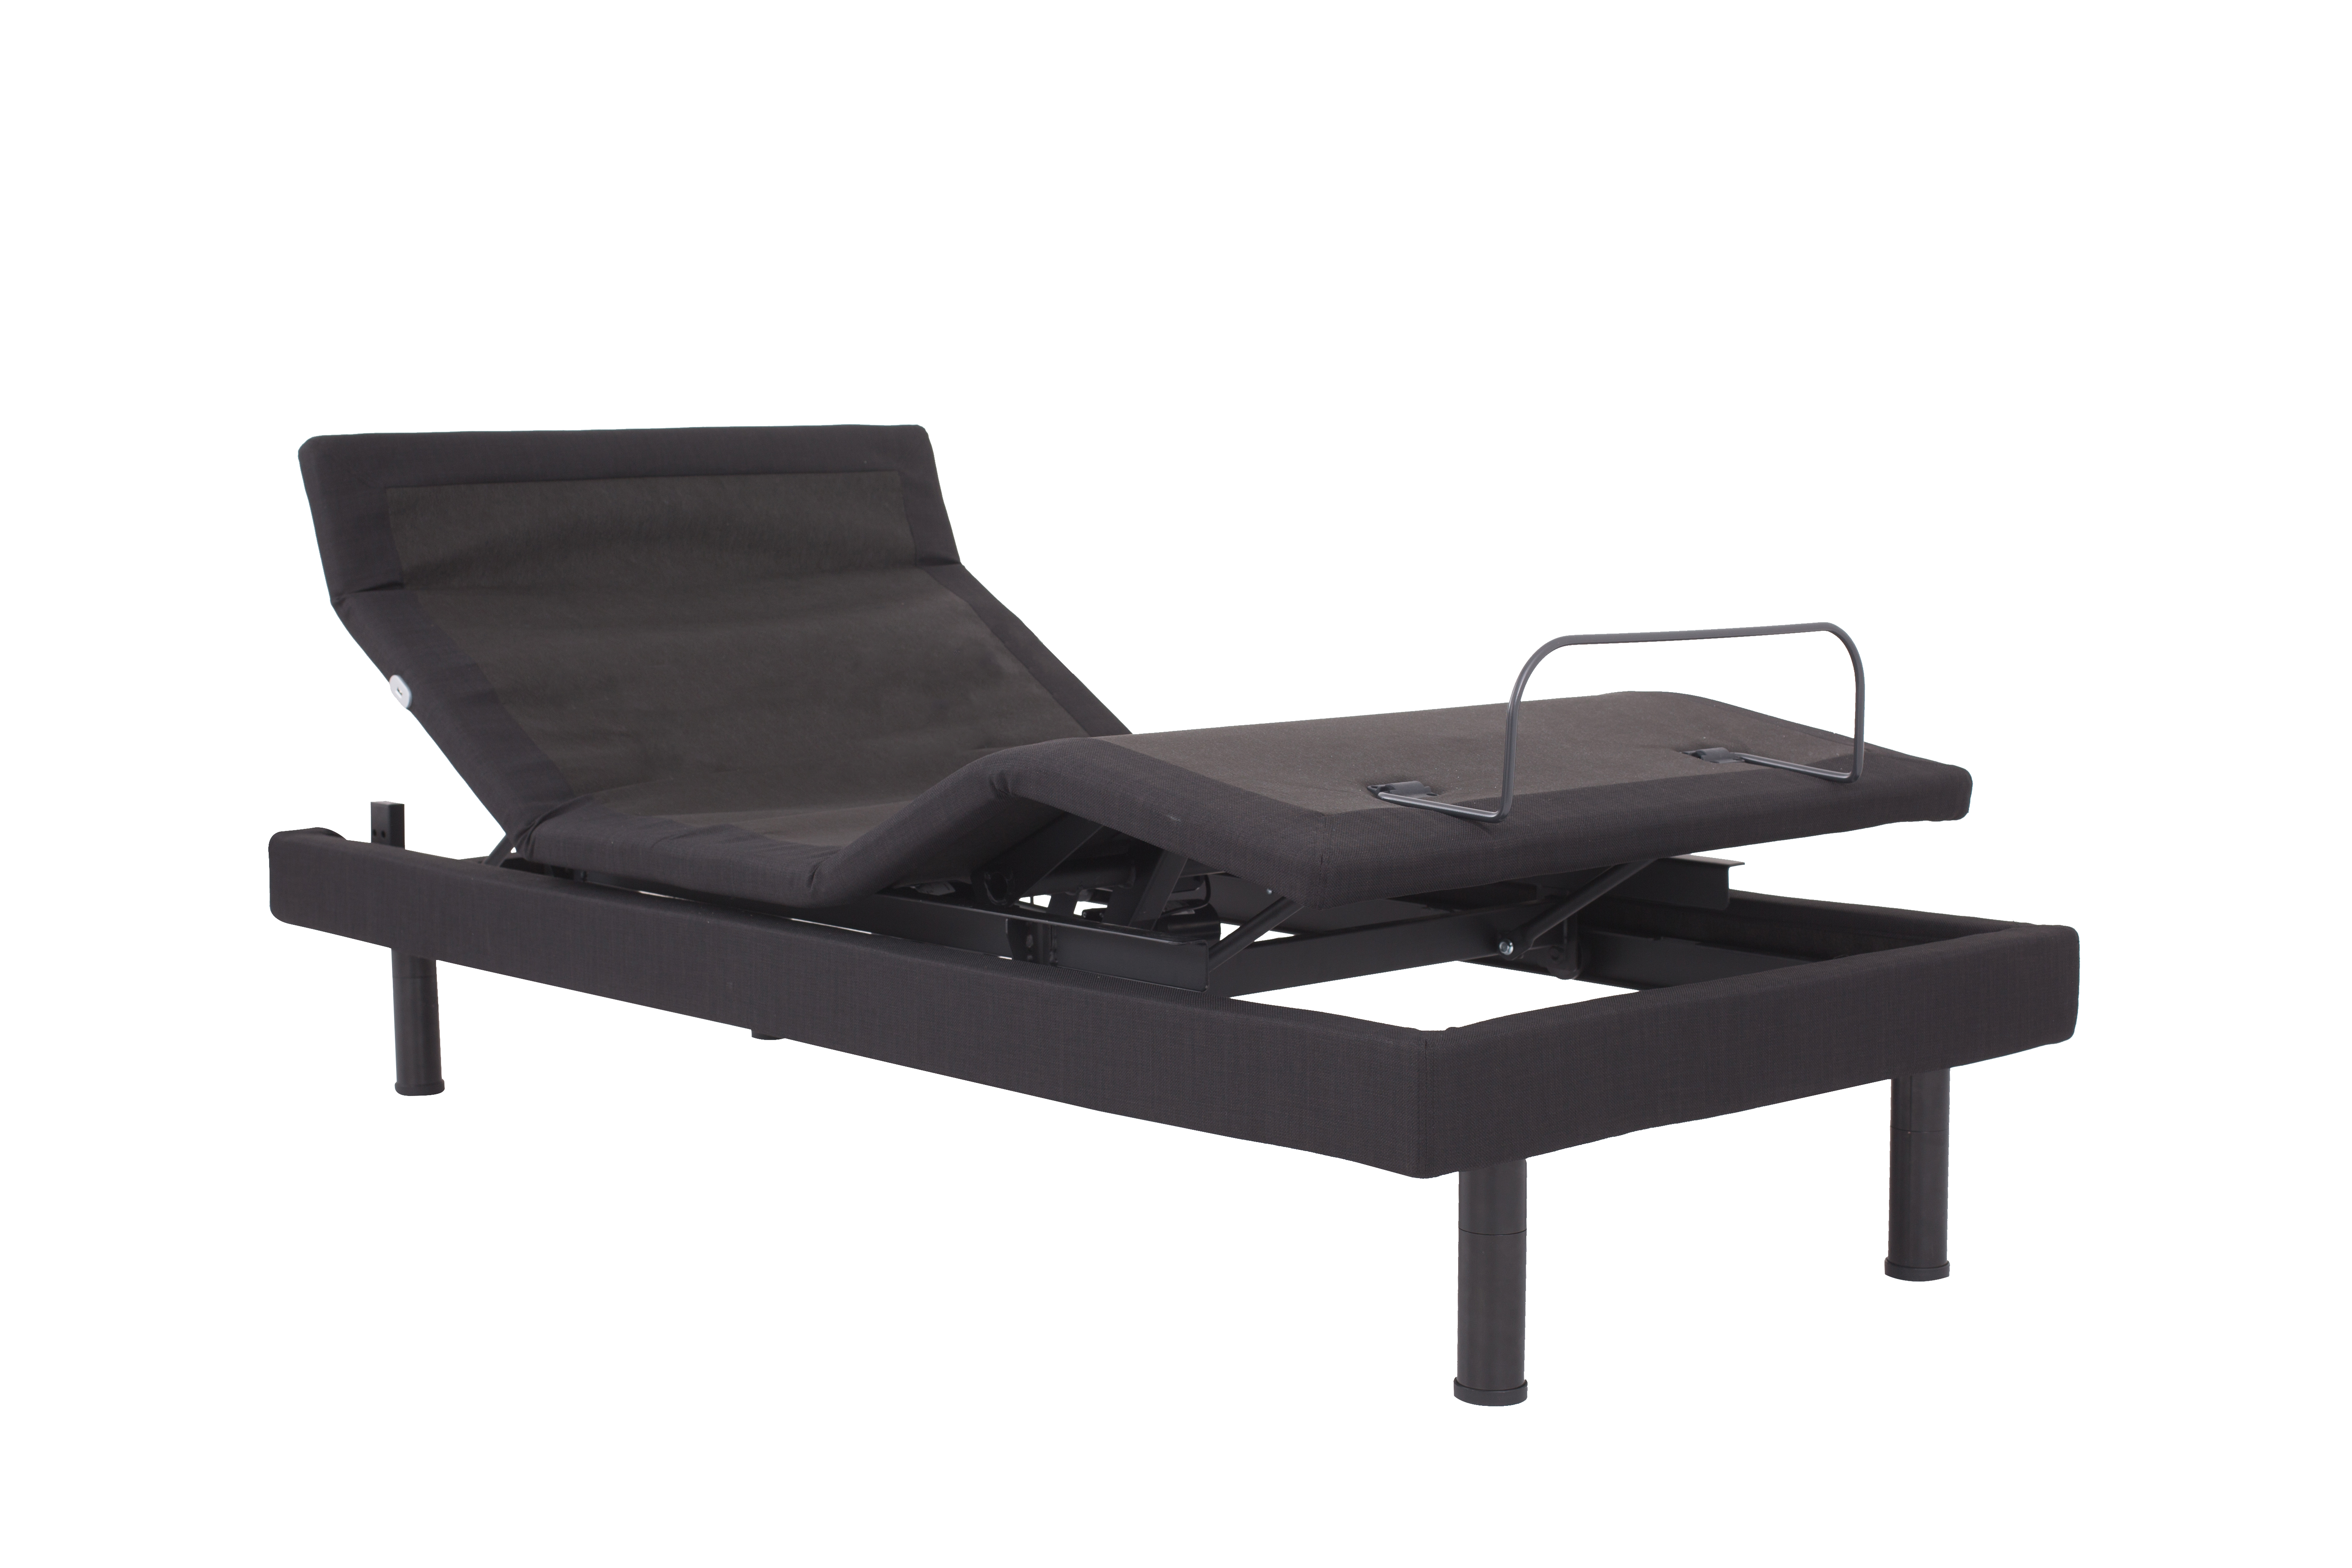 A black NE500S base is shown in an adjusted position with the head and foot of the bed elevated with black round legs against white background.